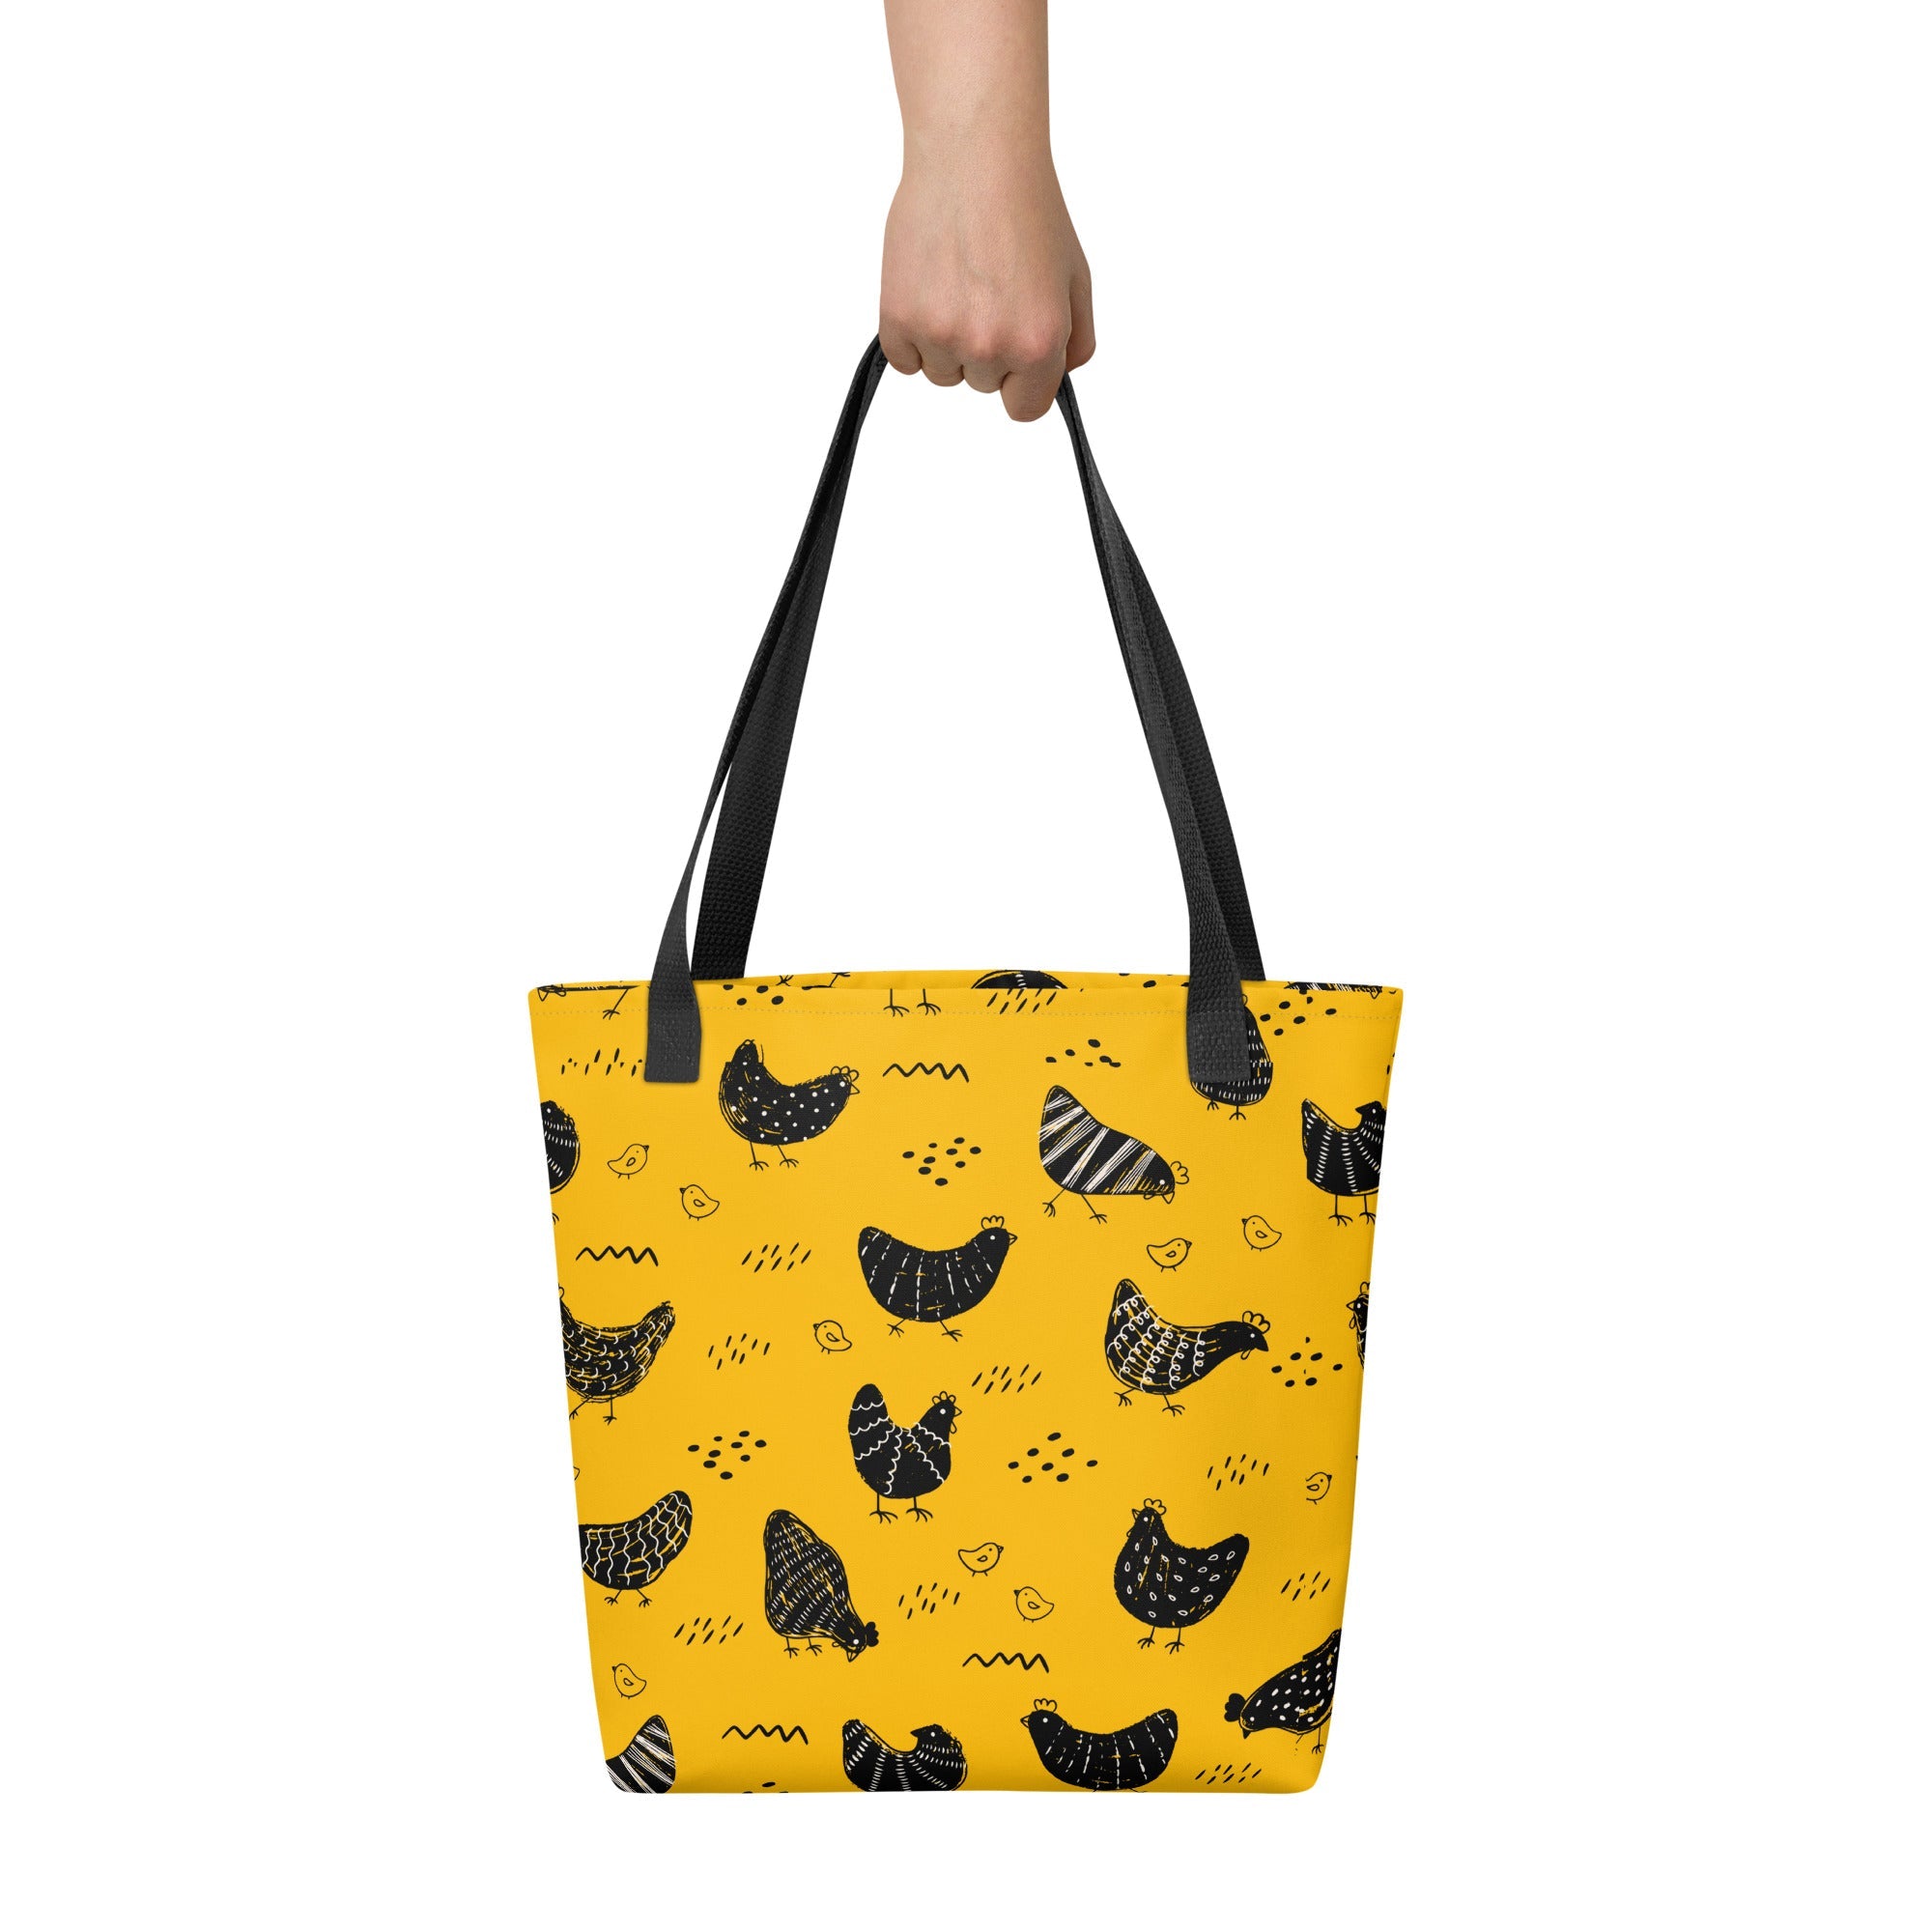 Vintage Yellow Chicken Tote Bag - Cluck It All Farms